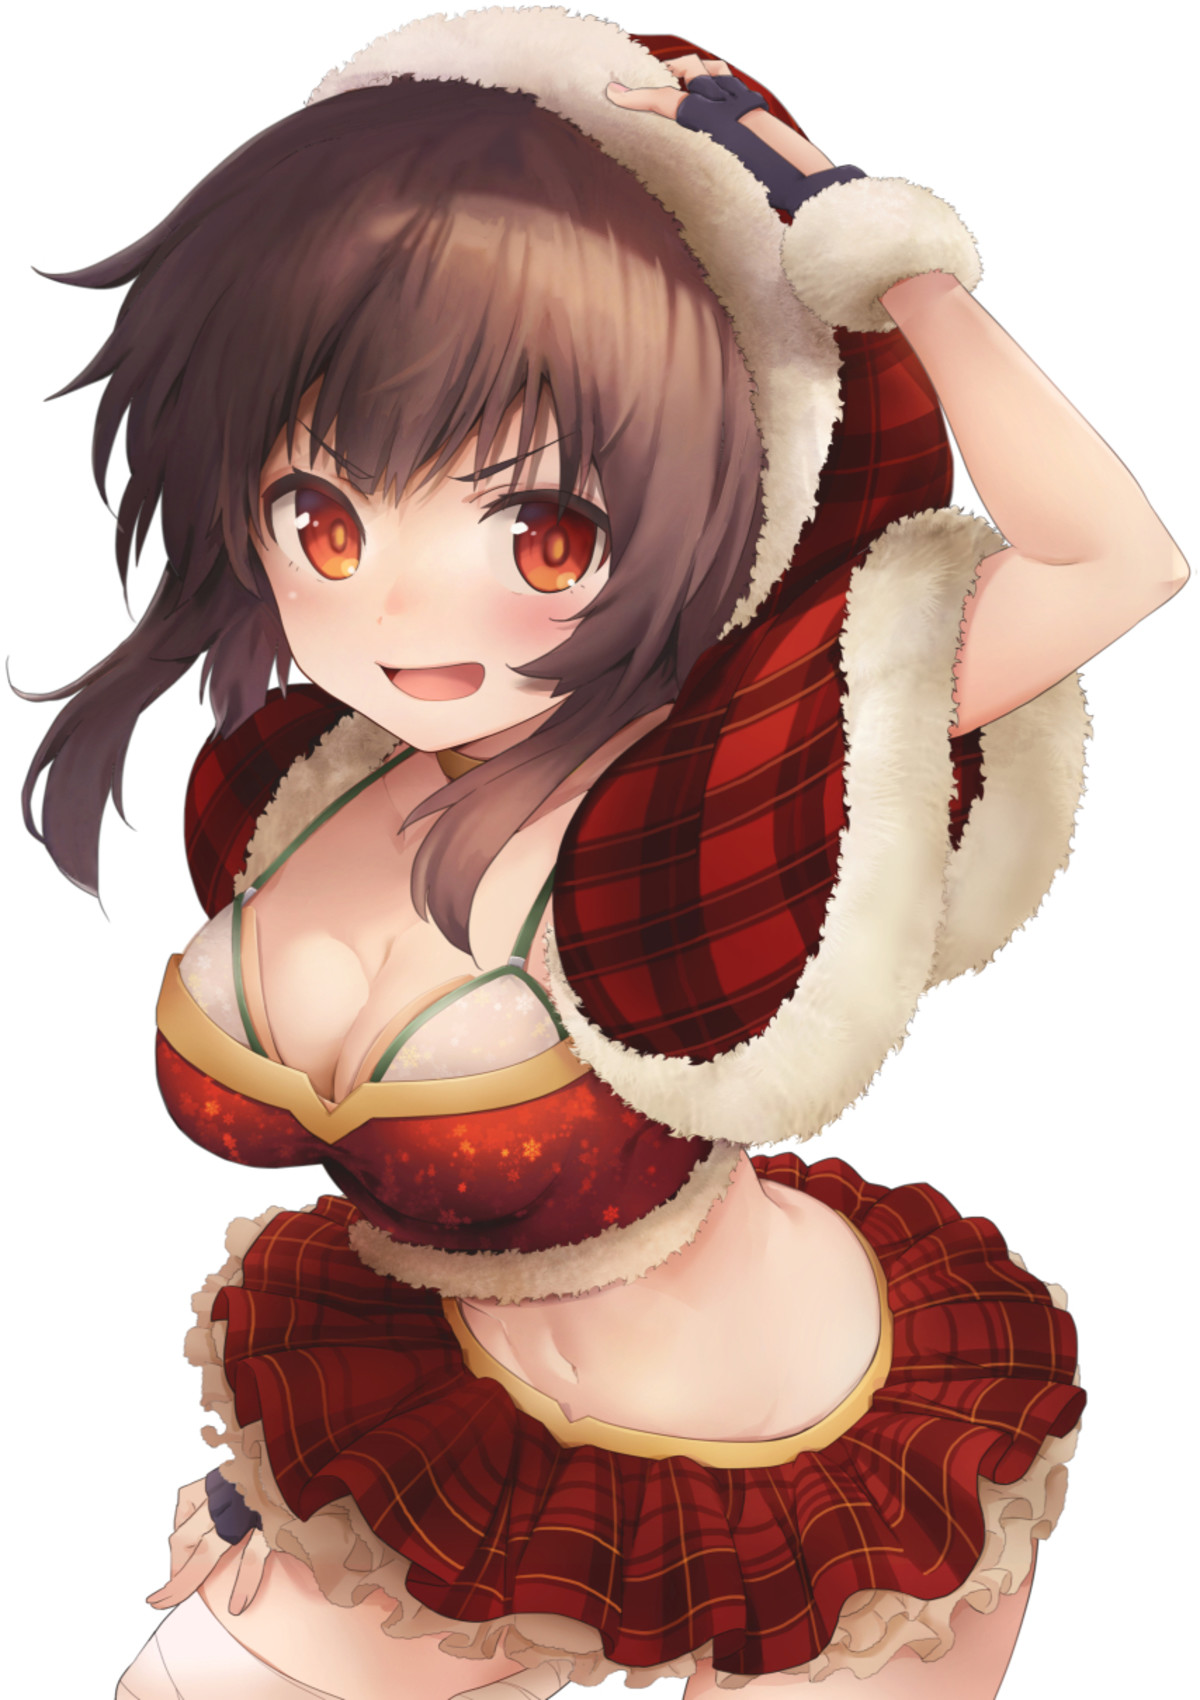 Daily Megu - 1034: Megu got D-cups for Christmas. join list: DailySplosion (823 subs)Mention History Source: .. But how will she appeal to the average weeb if she doesn't look like a child?